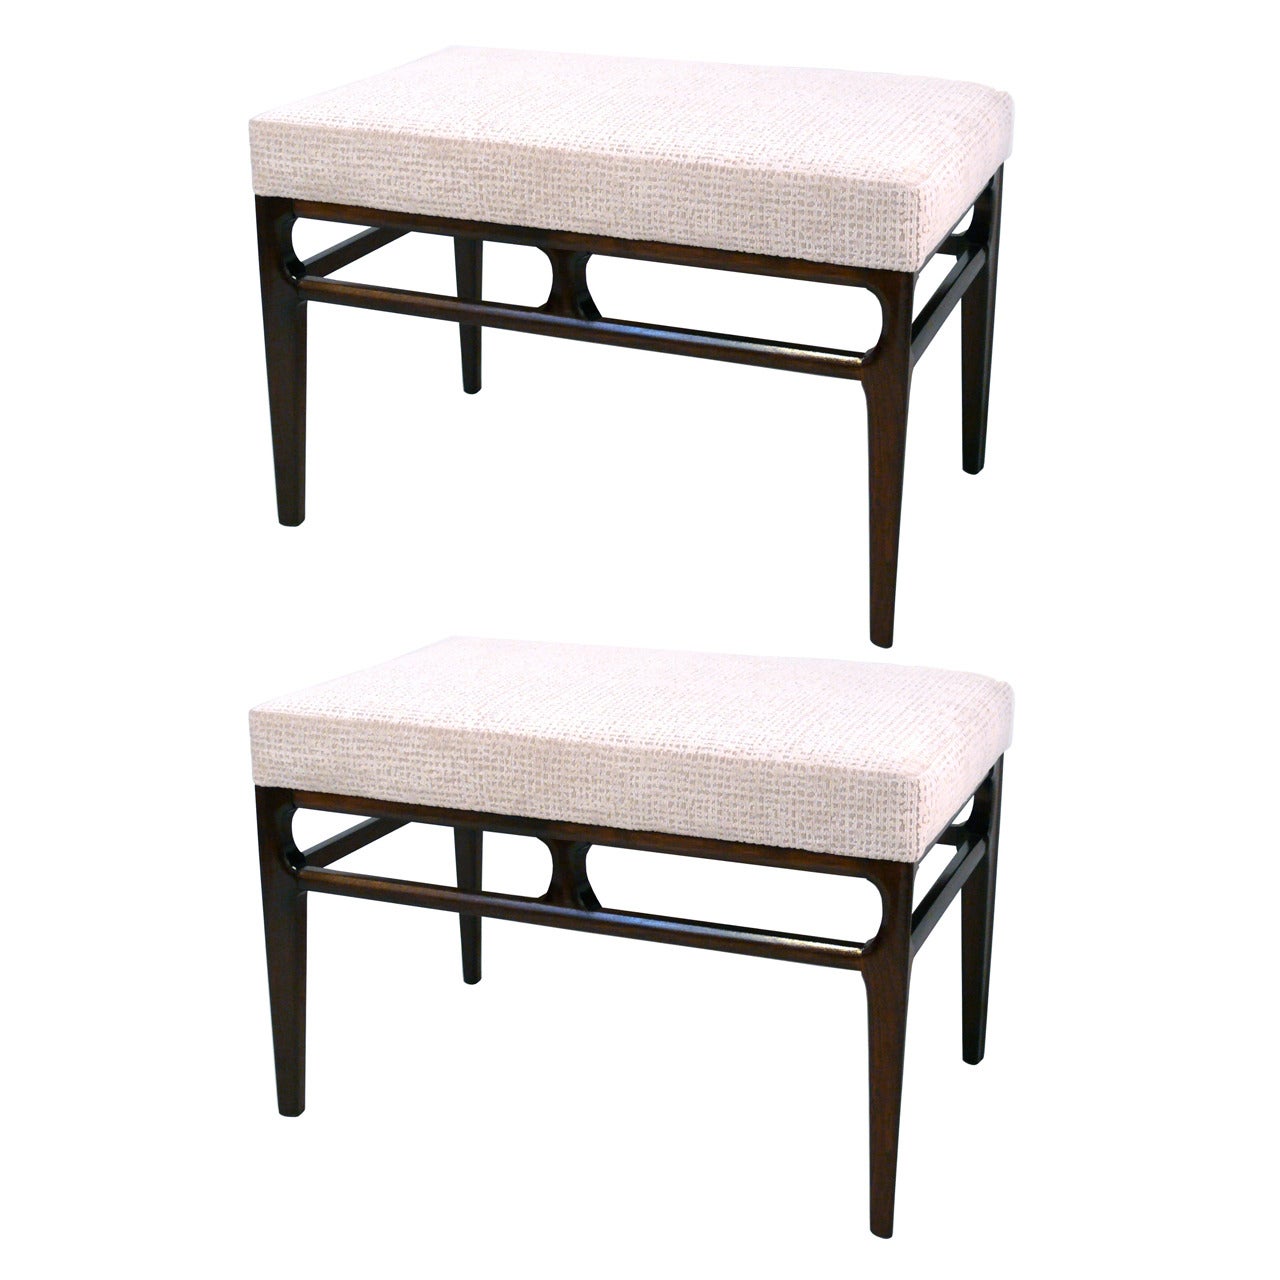 Pair of Proportion Benches For Sale